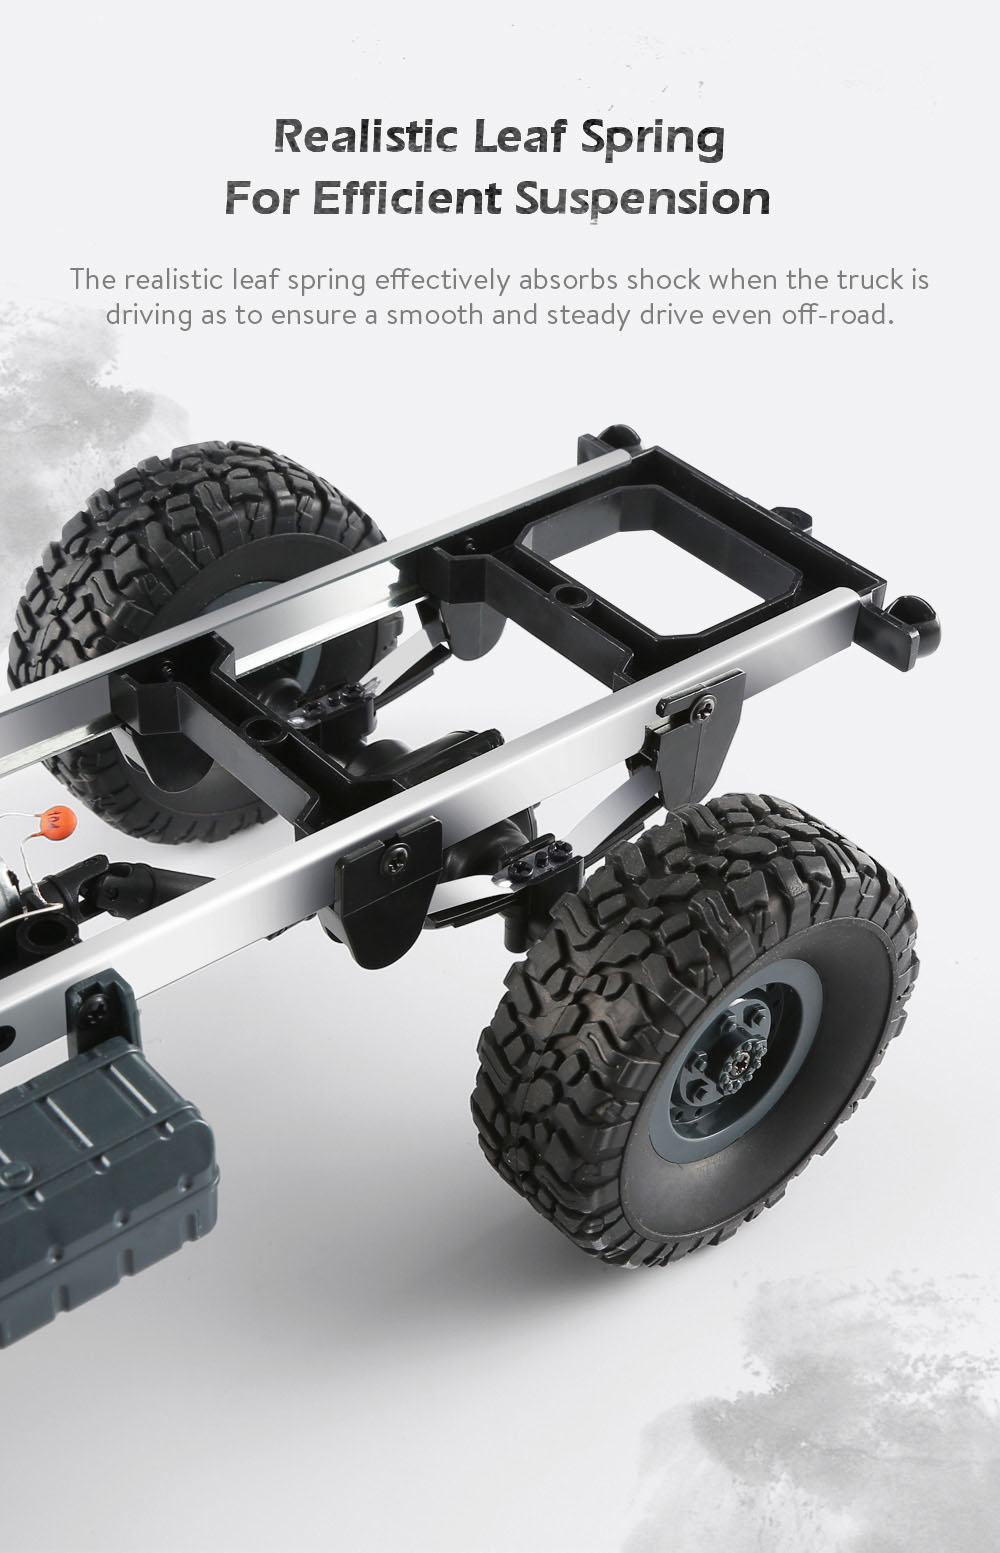 JJRC Q60 6WD RC Off-road Car Military Truck Inclined Plane Differential / Shock Absorbers / Speed Conversion